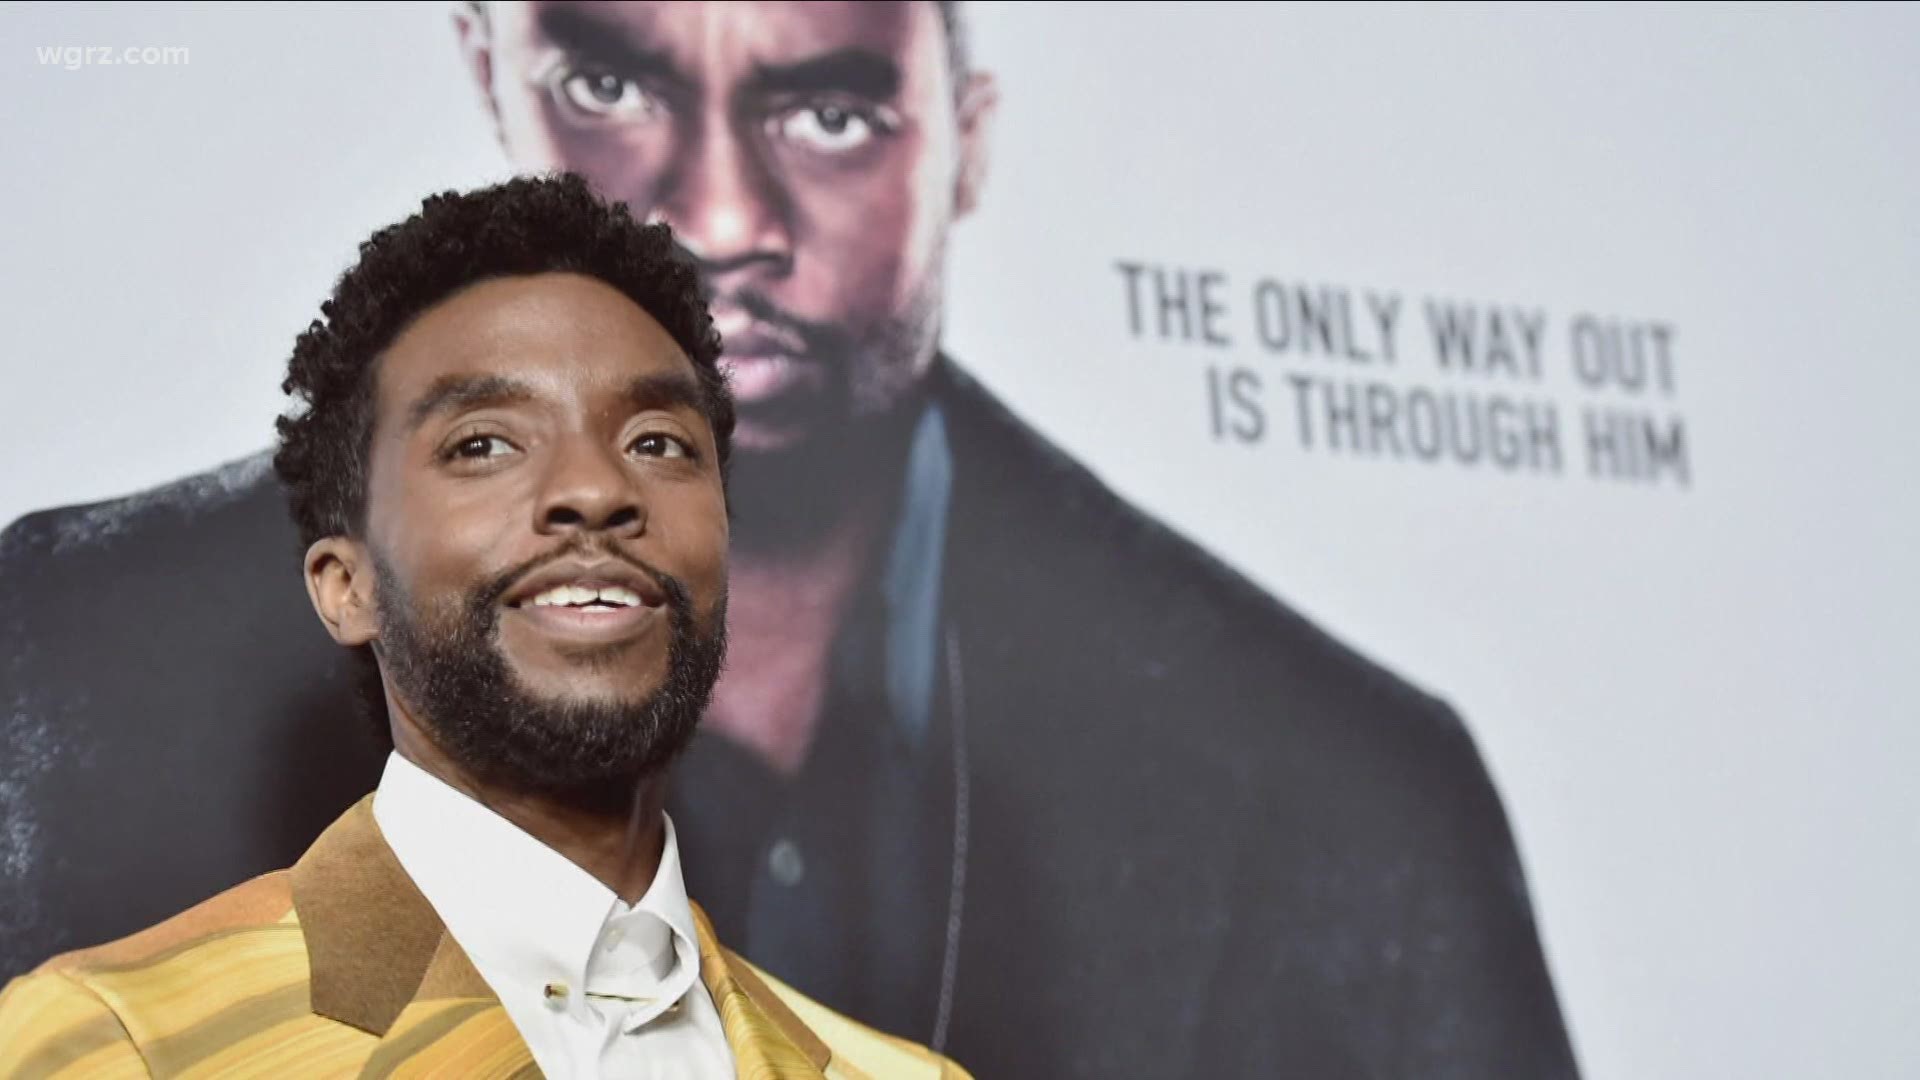 Boseman shot the movie Marshall in Buffalo back in 2016, and some of the most memorable scenes were shot outside Buffalo City Hall.